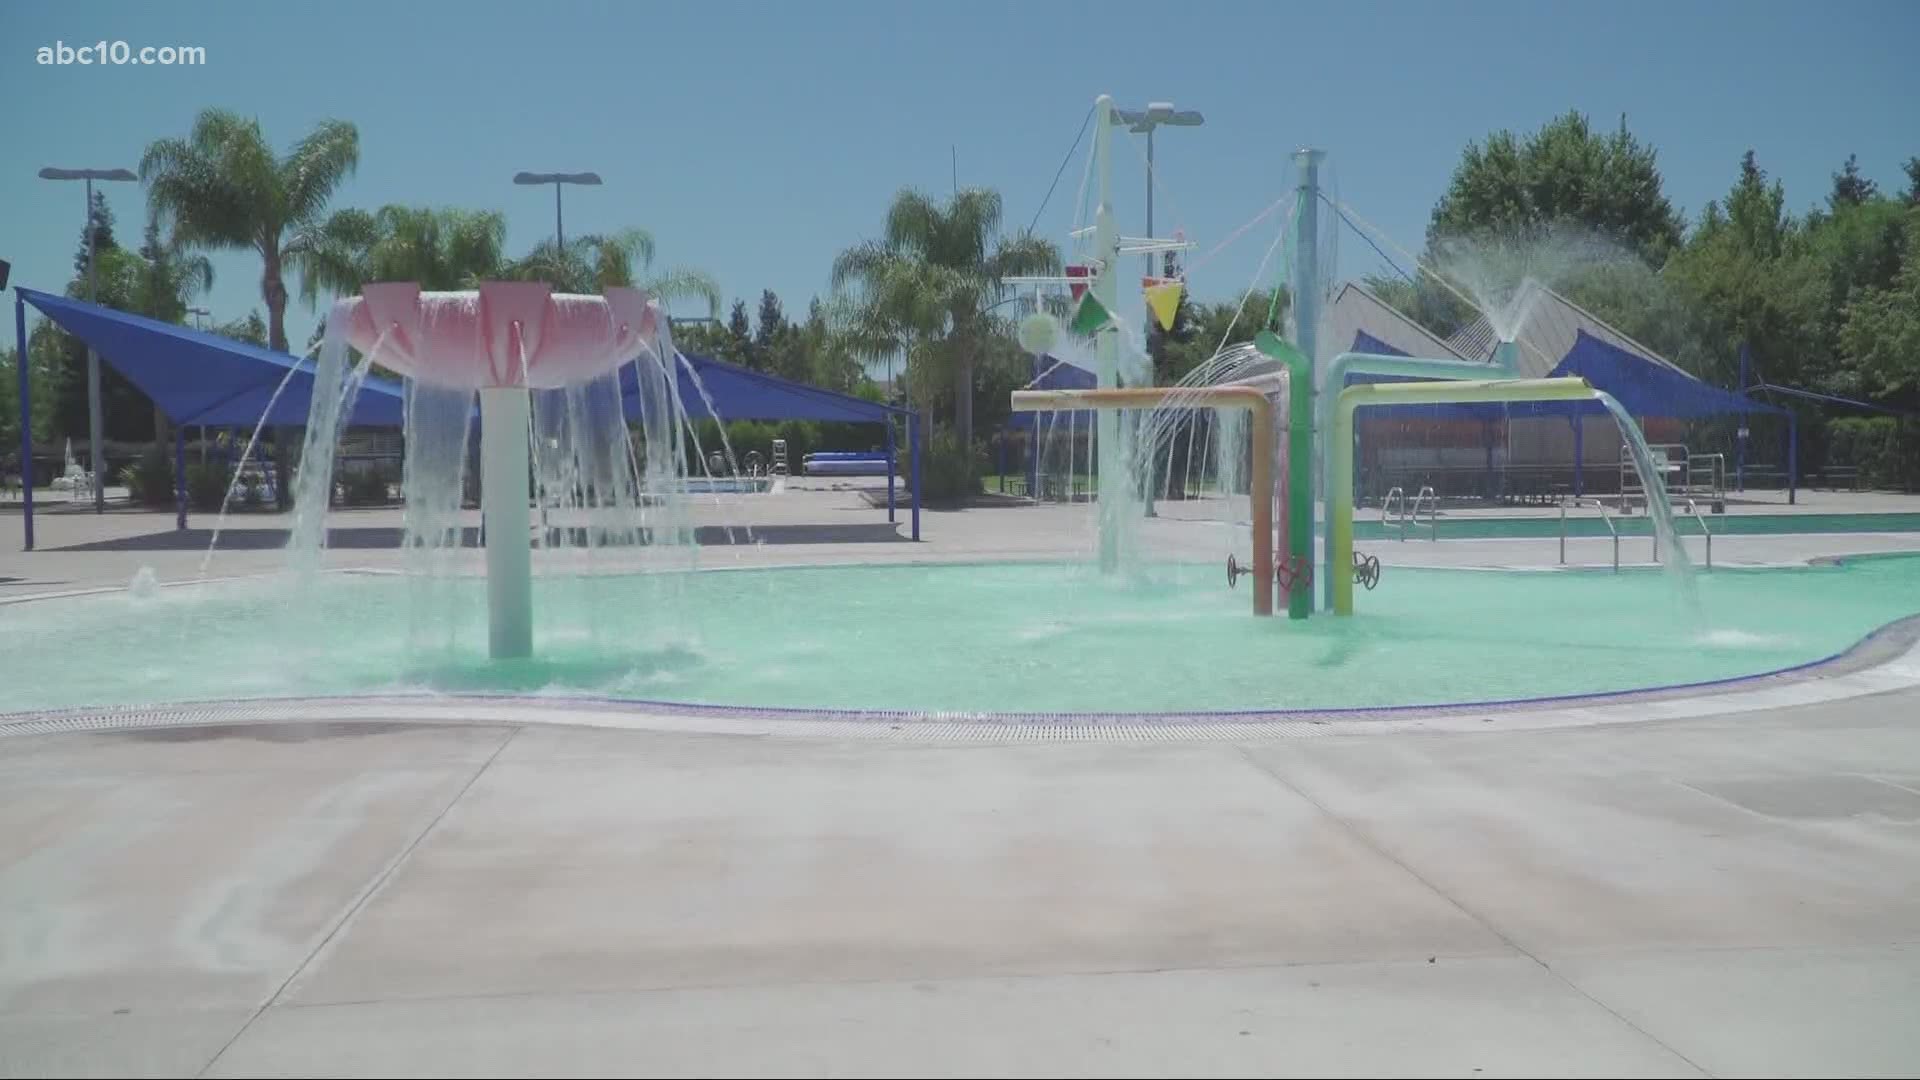 The Elk Grove Aquatics Center is limiting the number of guests and enforcing social distancing. People who want to go should make reservations.